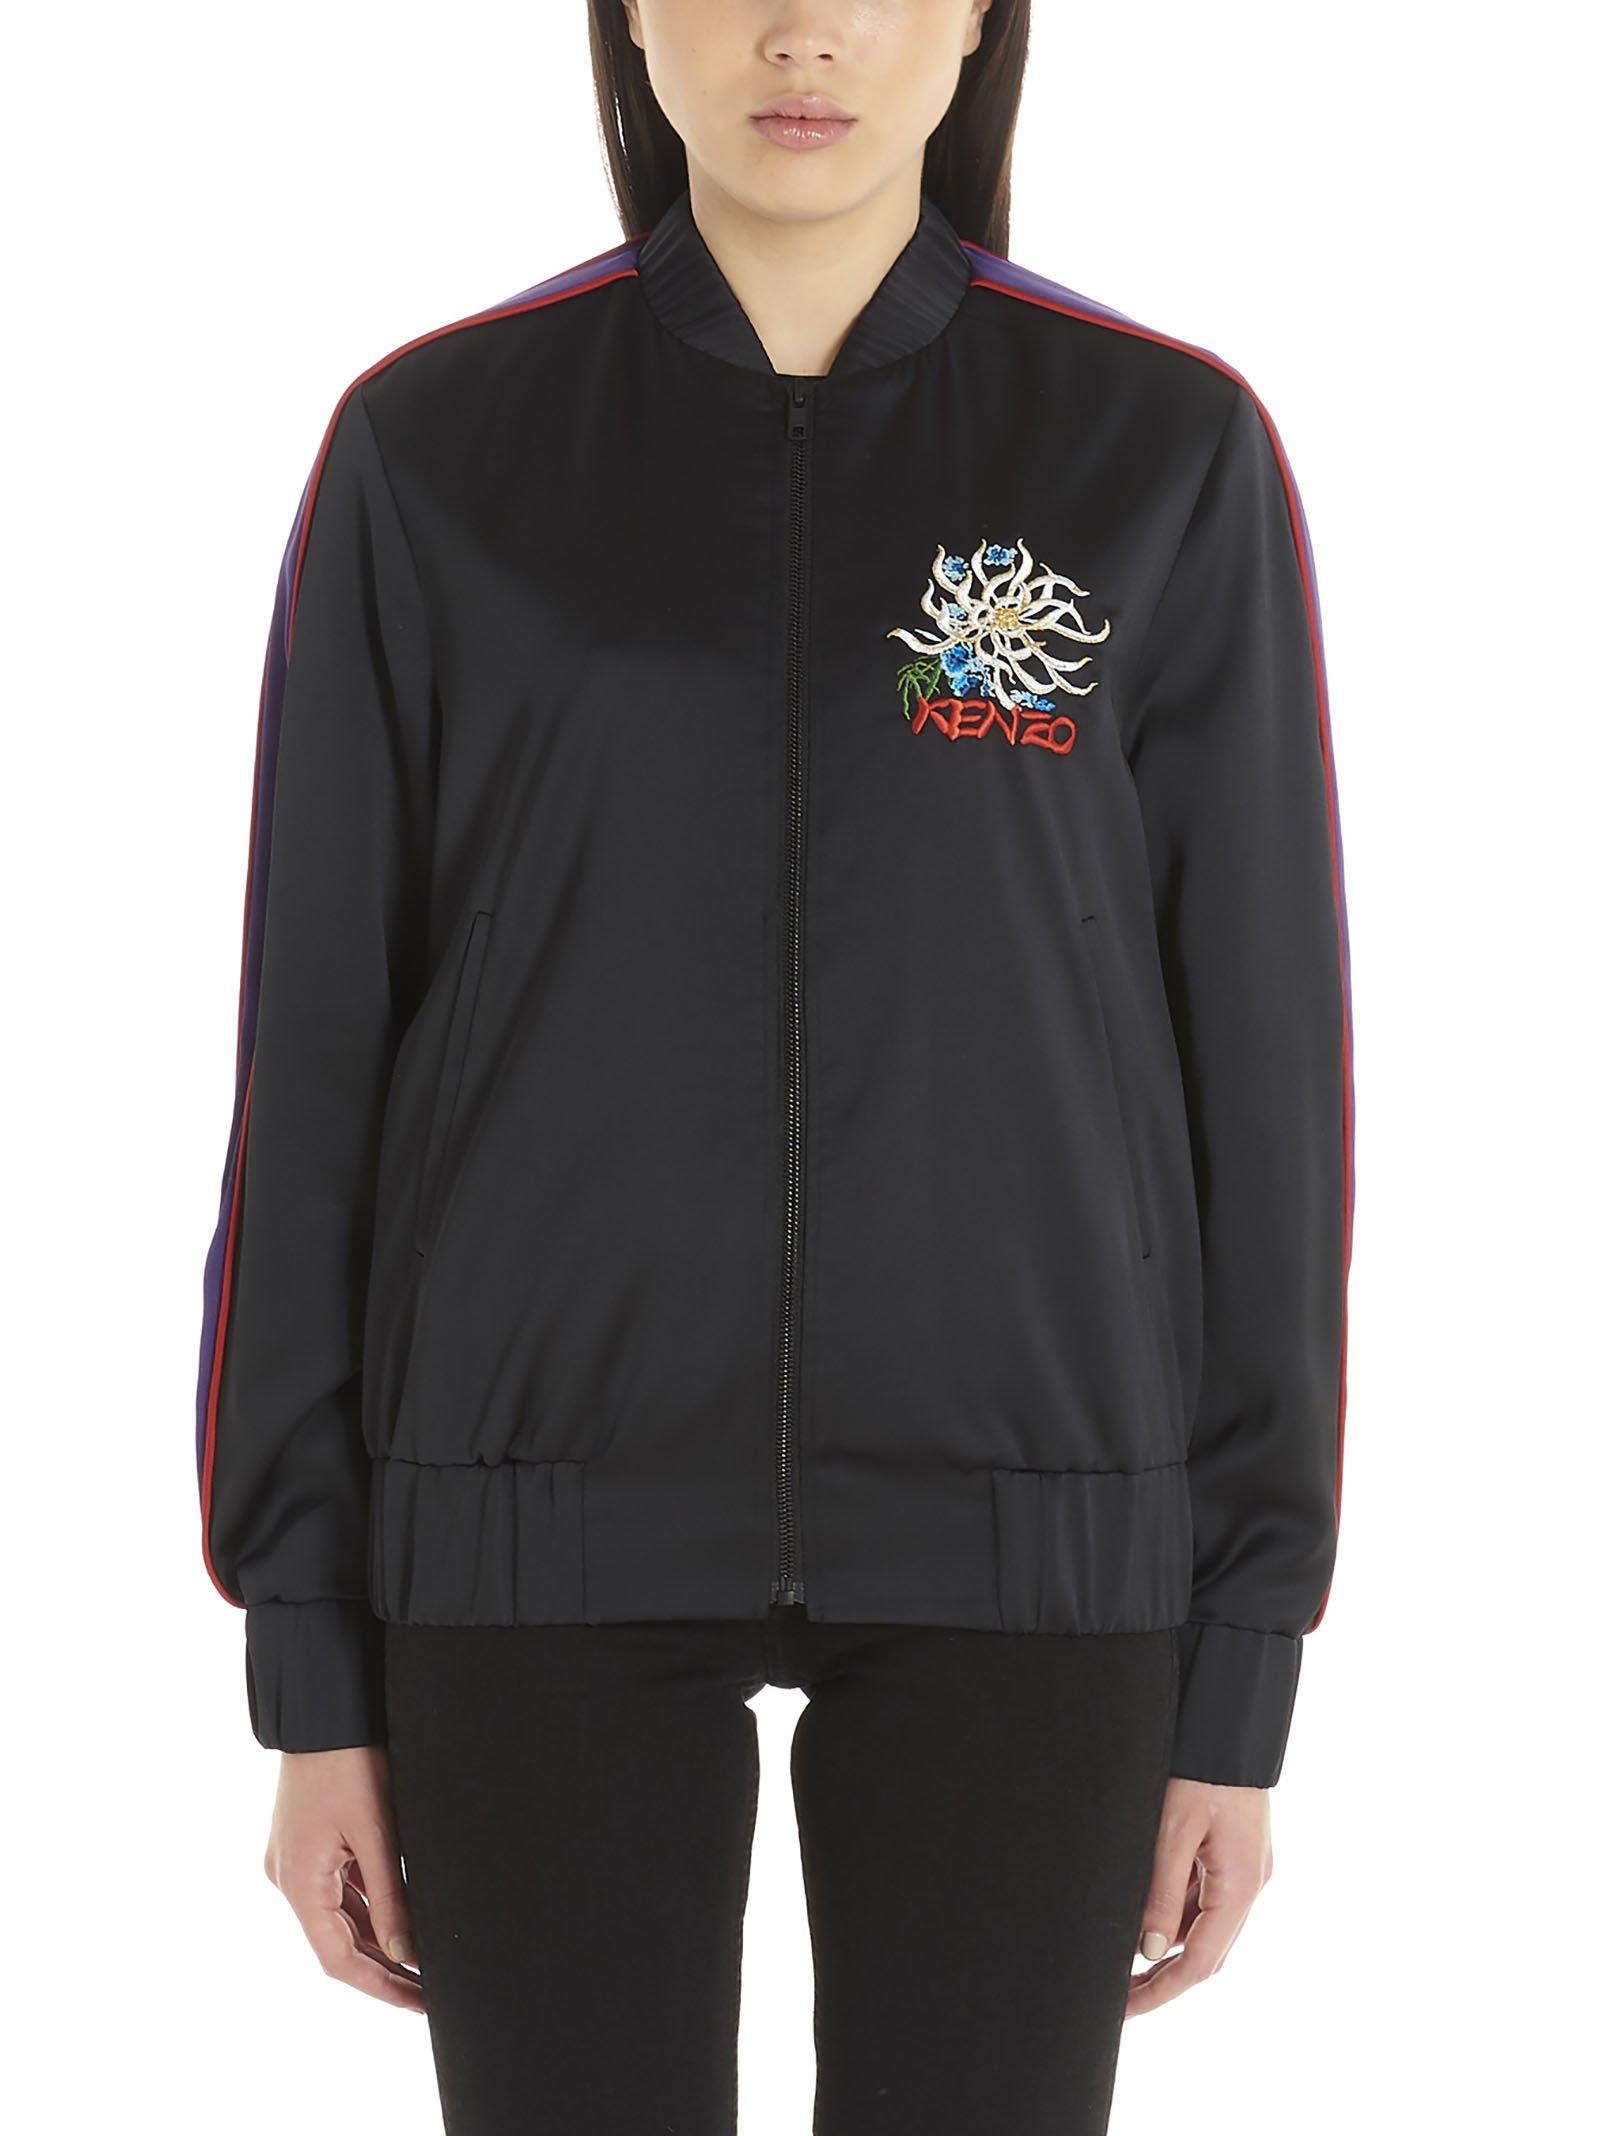 KENZO Synthetic Logo Embroidered Bomber Jacket in Black - Lyst